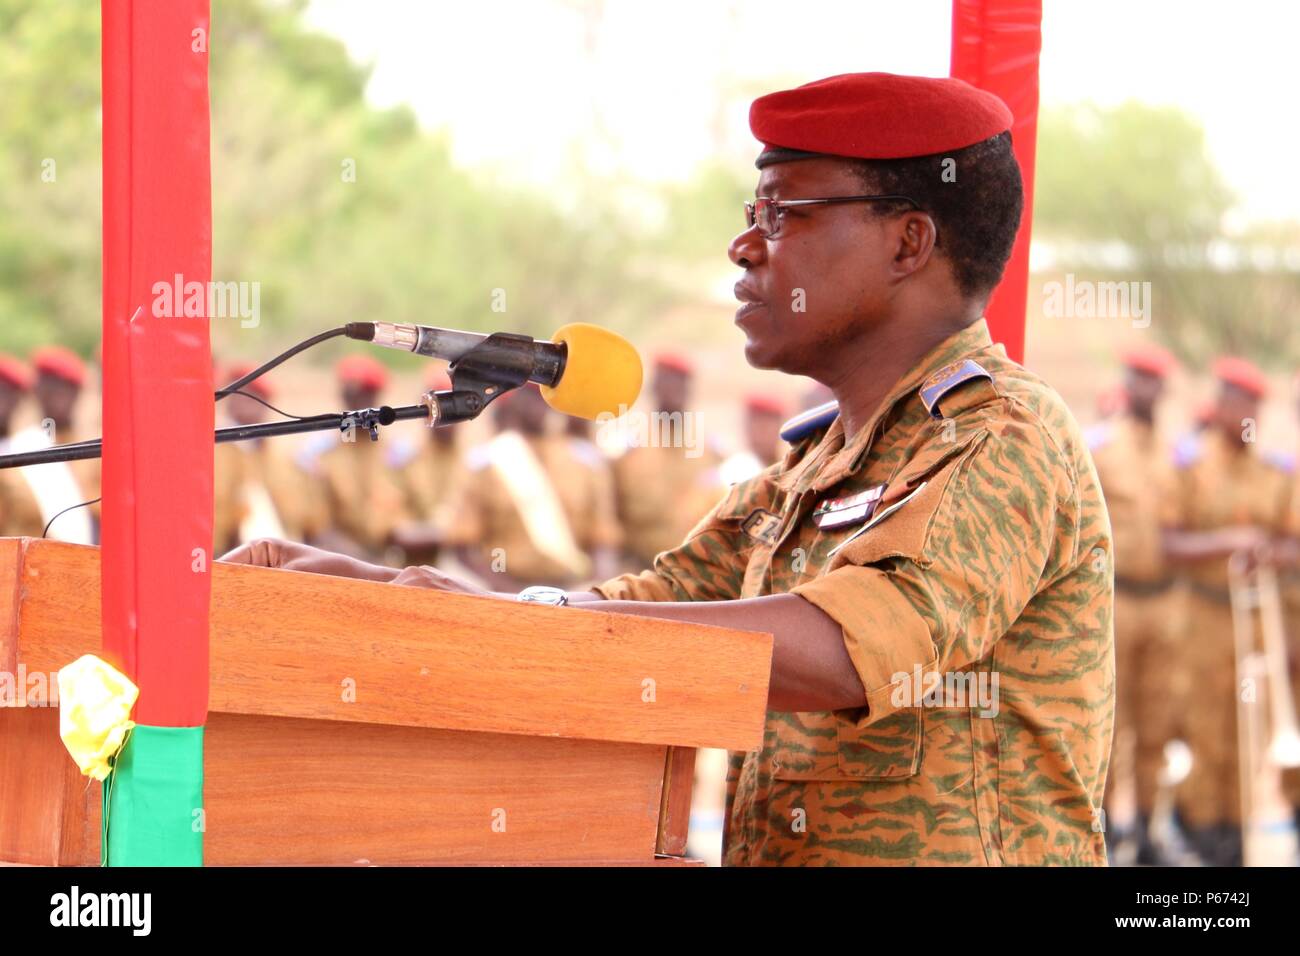 General Pingrenoma Zagre, Chief of Defense Staff for Burkina Faso Armed Forces, addresses dignitaries and multinational military leaders during the Western Accord 2016 Closing Day Ceremony May 13, 2016 at Camp Zagre, Ouagadougou, Burkina Faso. The two-week command post exercise, which began May 2, brought together 15 West African Nations, 7 NATO European countries and the U.S. to work as a multinational headquarters to build interoperability and shared understanding. (U.S. Army photo by Staff Sgt. Candace Mundt/Released) Stock Photo